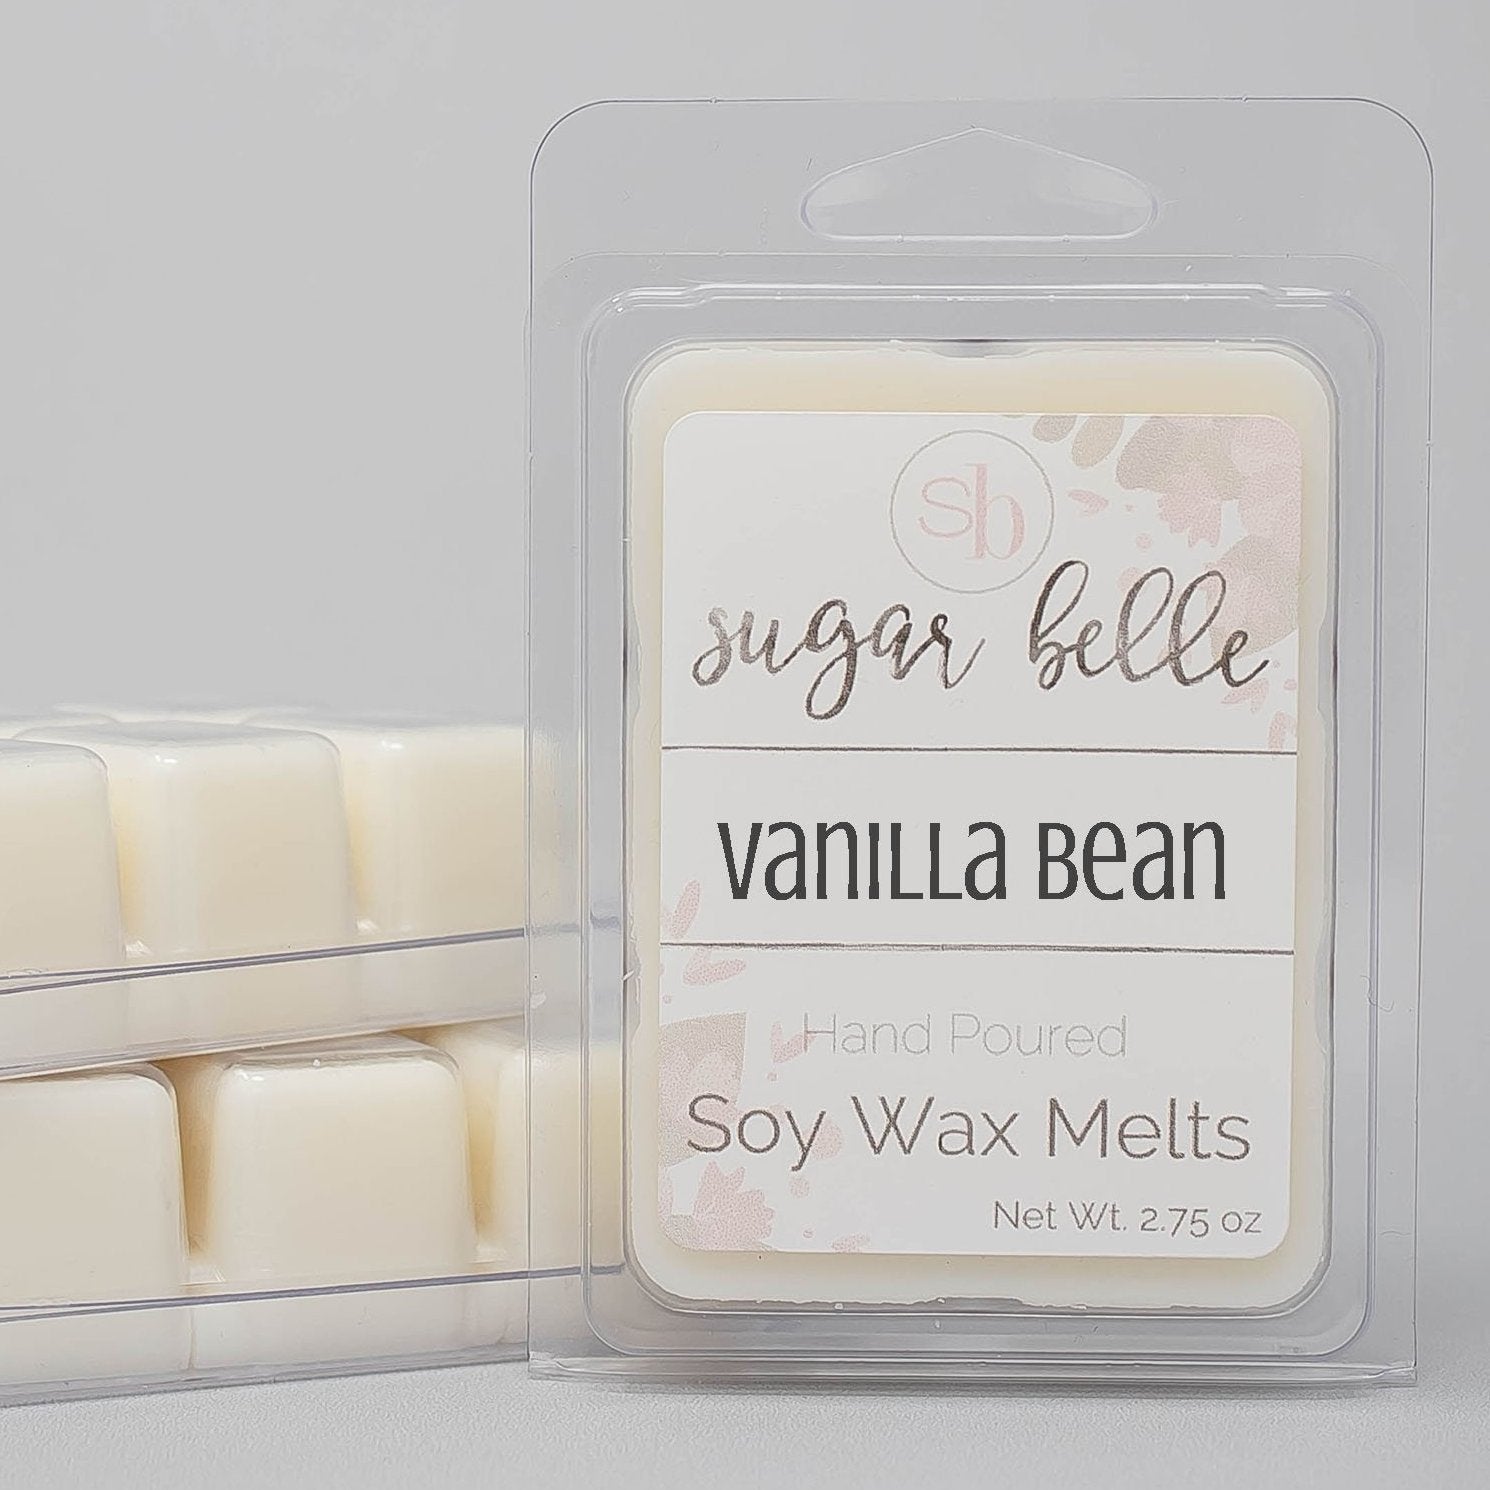 Vanilla Bean Scented Soy Wax Melts – Sugar Belle Candles